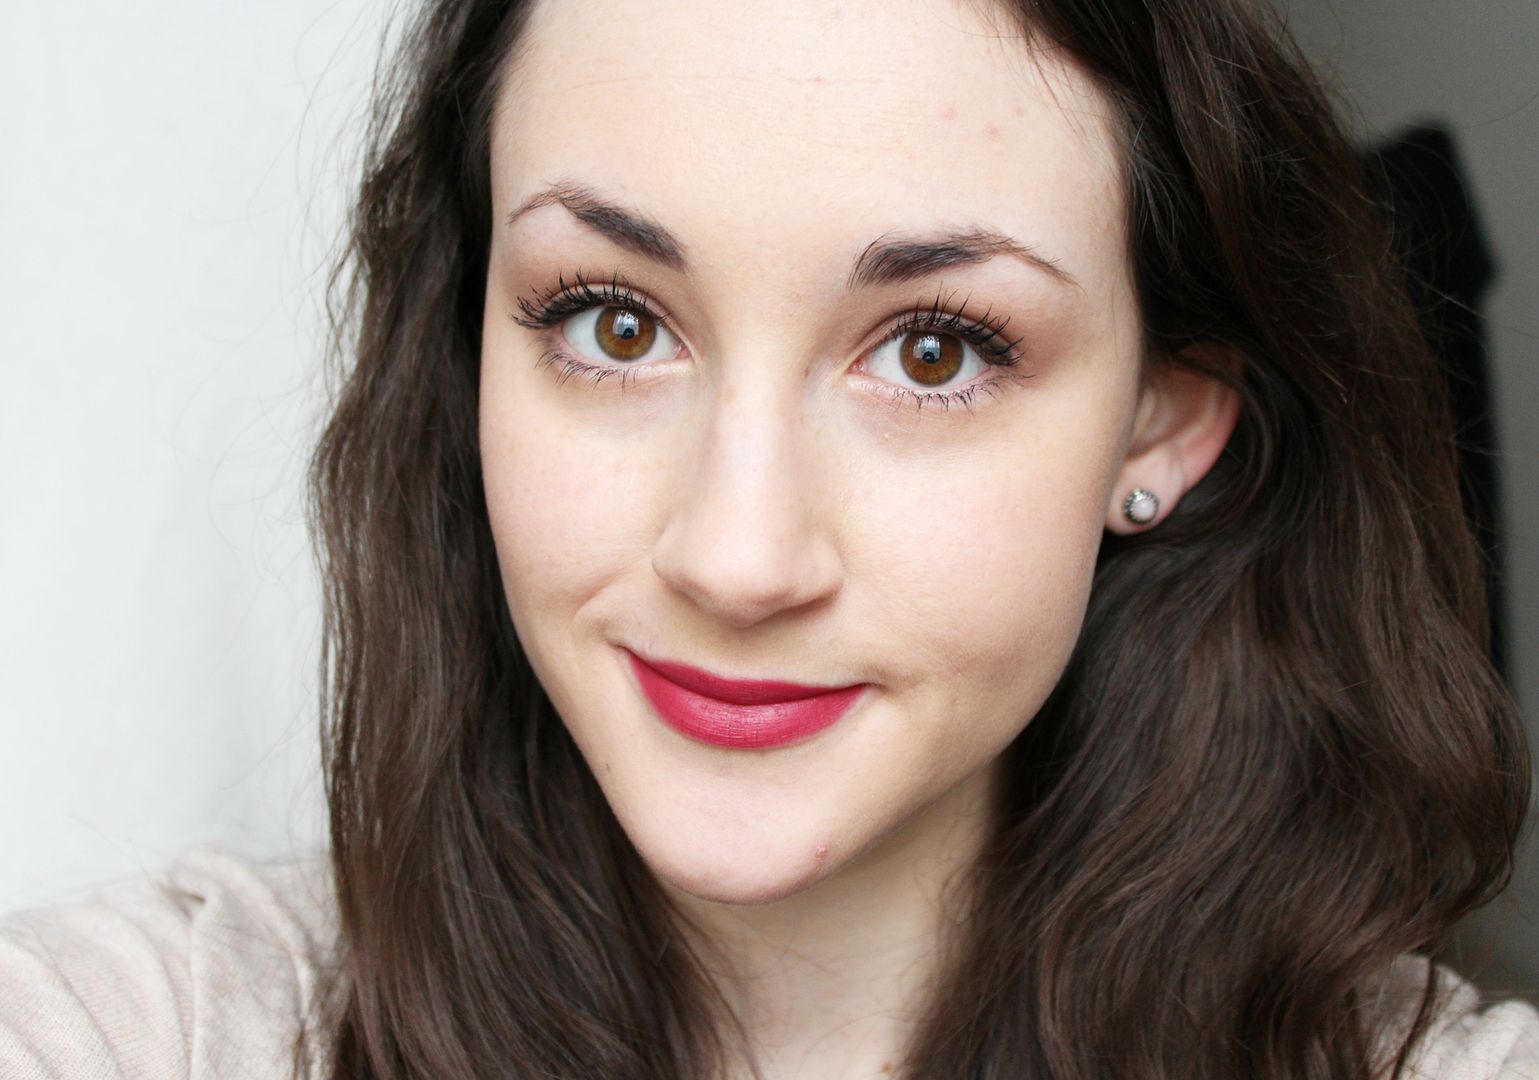 Bold-Red-Pink-Lip-Valtentines-Day-Makeup-Look-2015-Belle-Amie-UK-Beauty-Fashion-Lifestyle-Blog